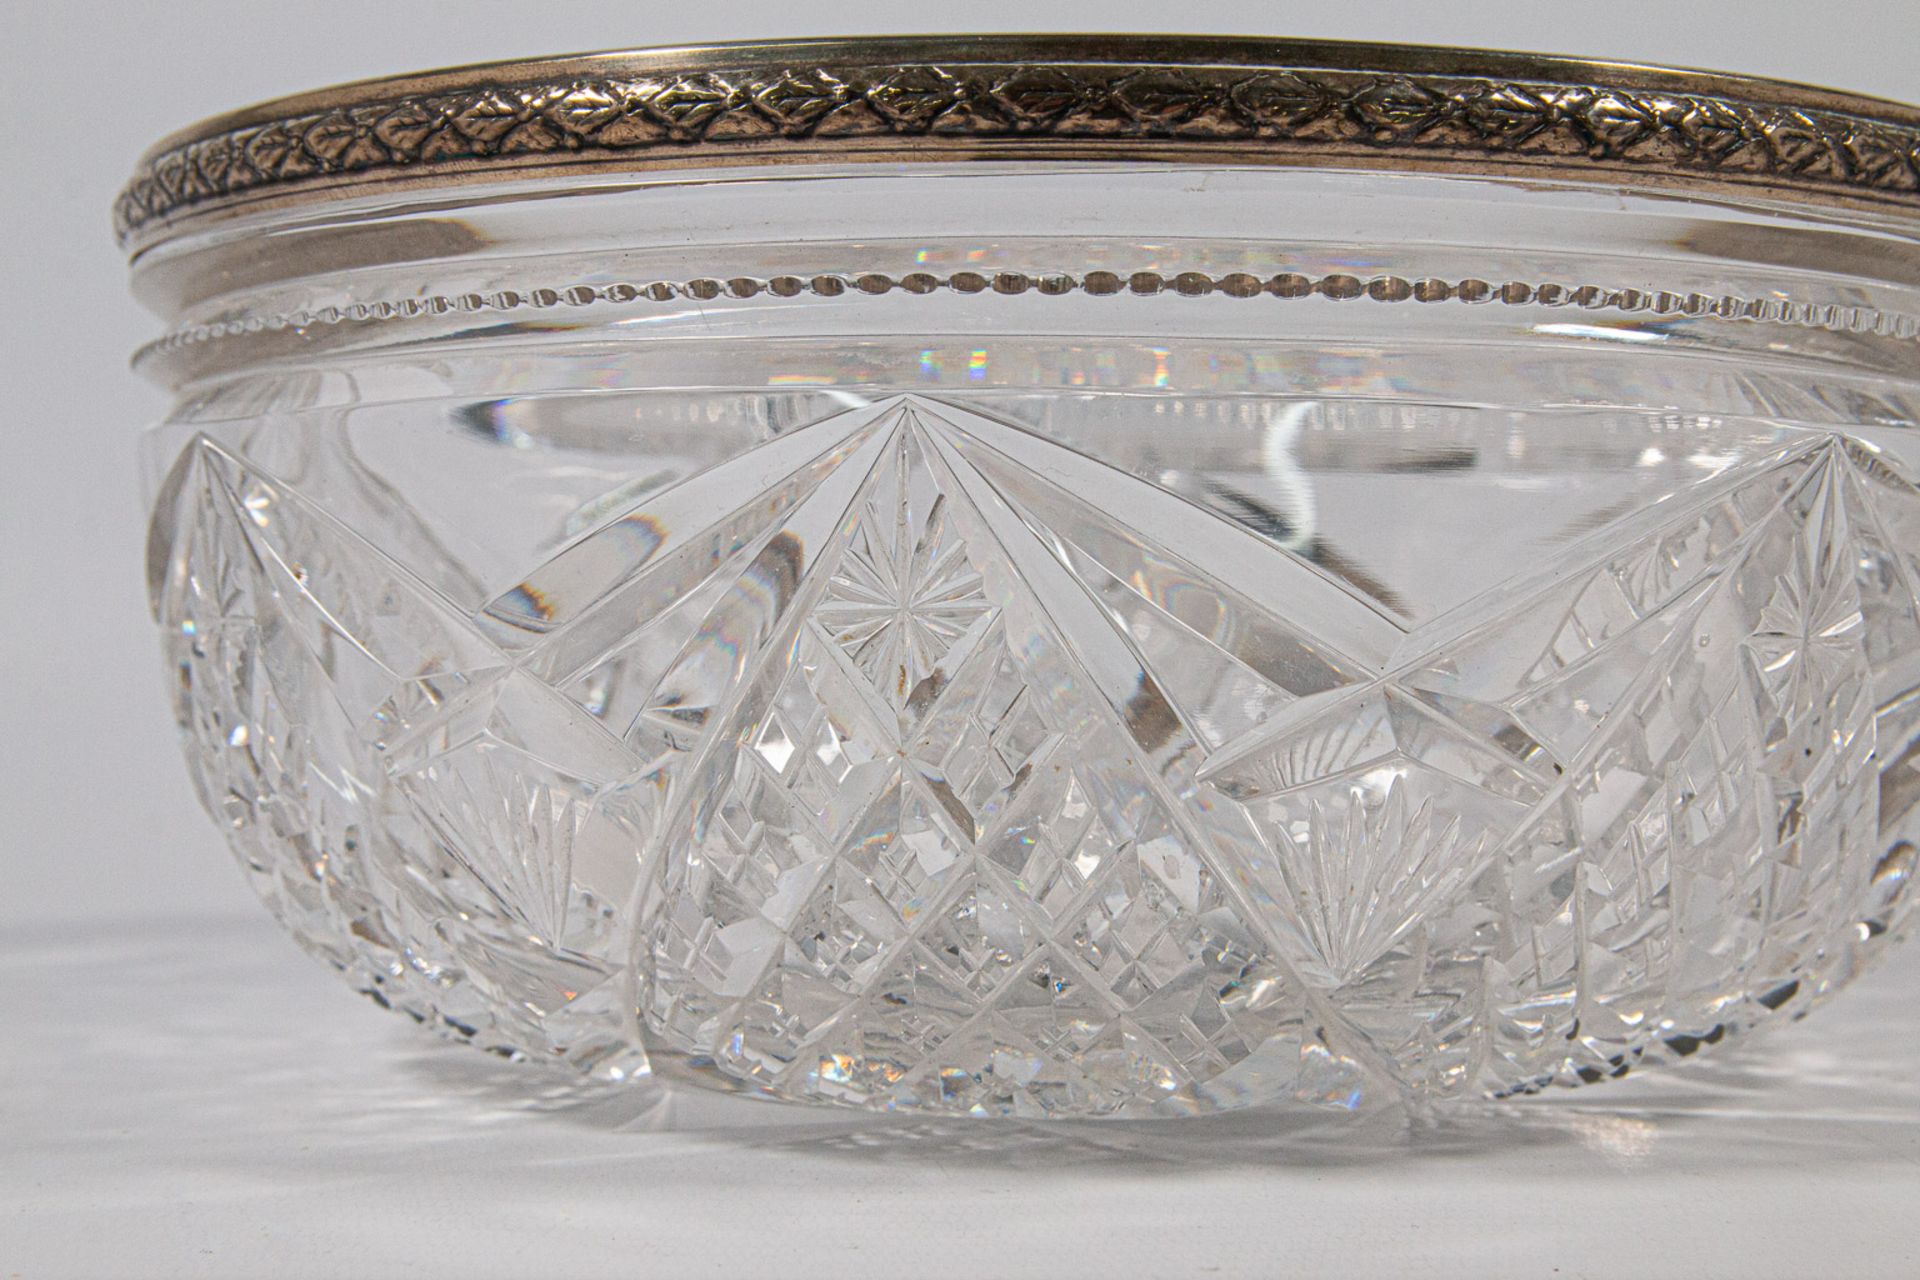 Collection of 3 vases and bowls, Bohemian crystal - Image 36 of 37